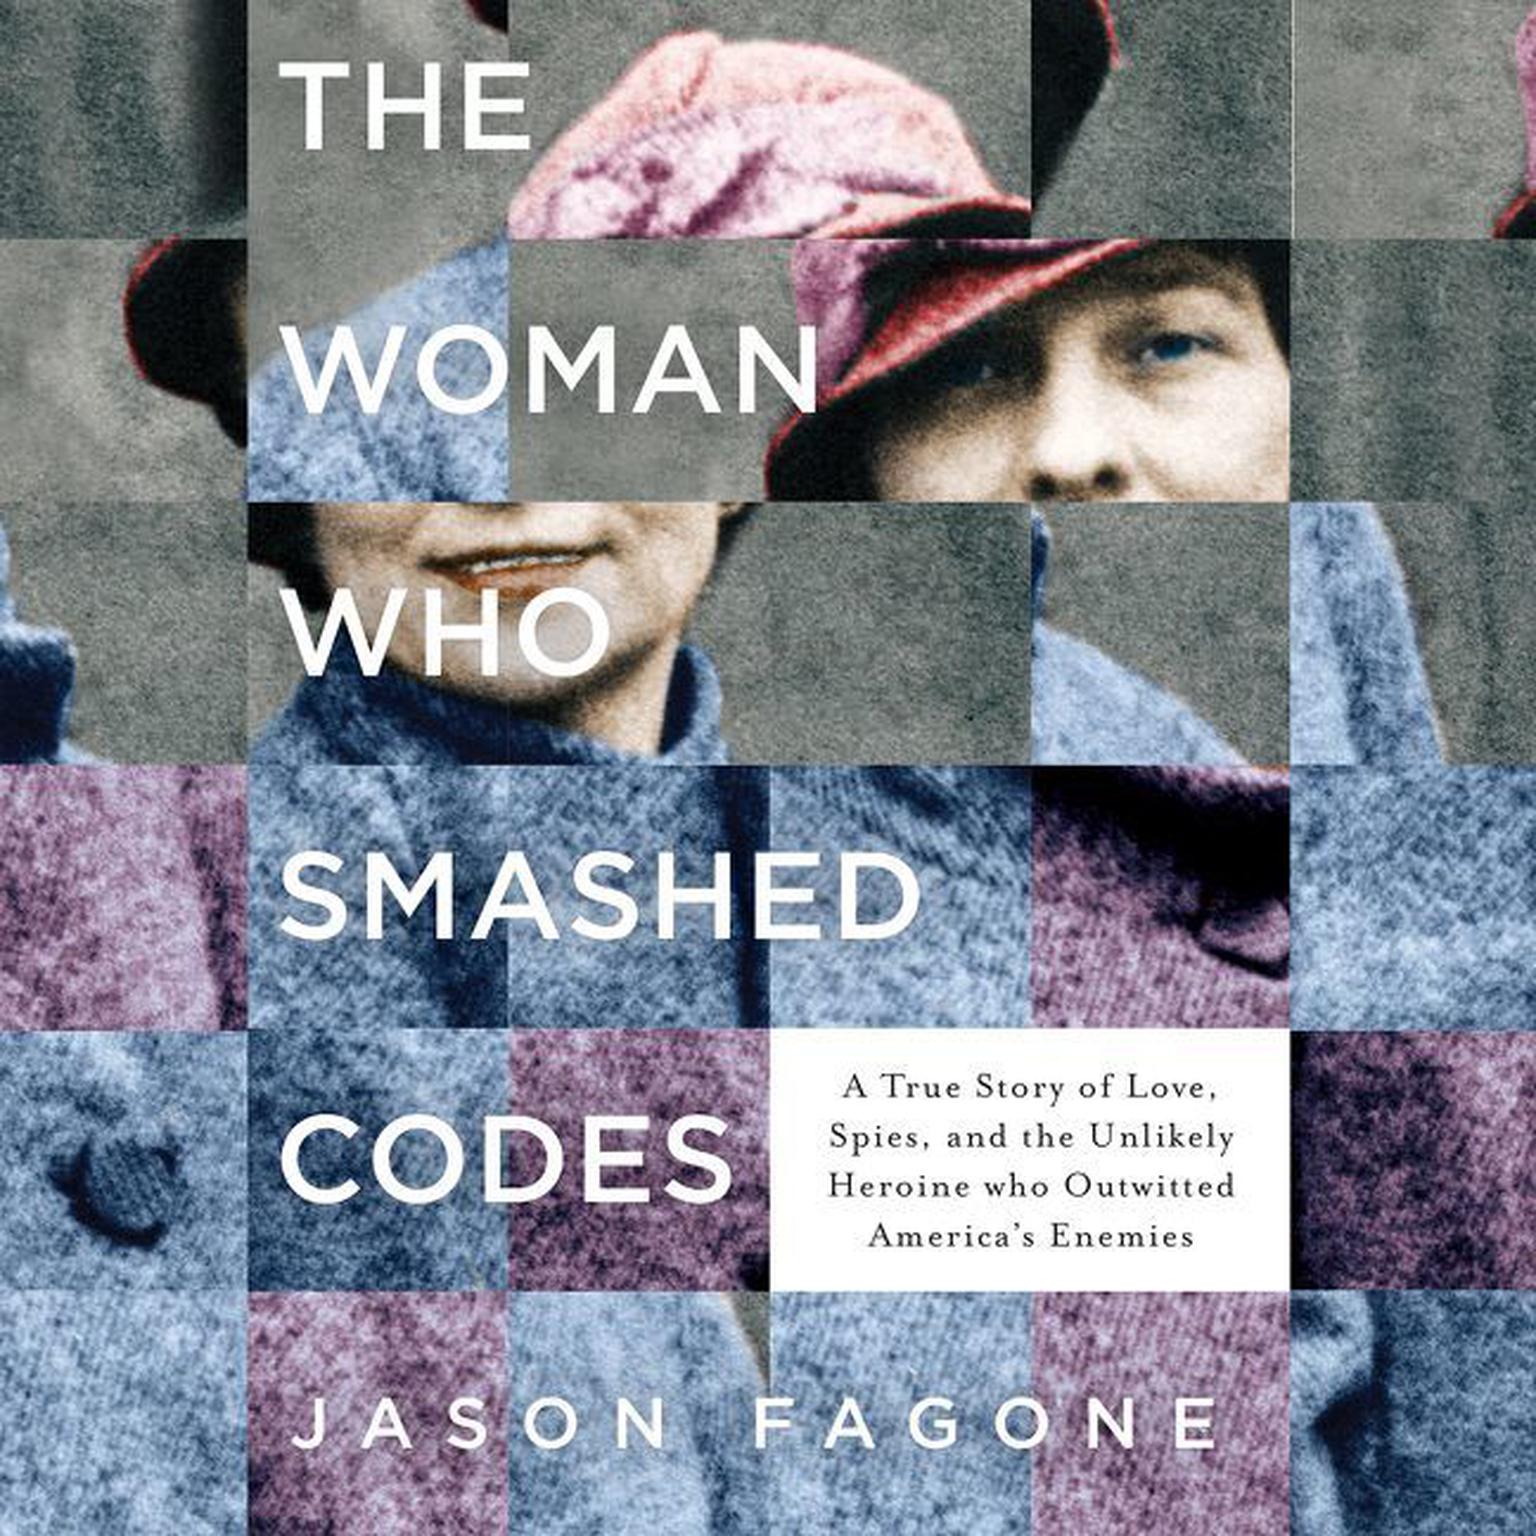 The Woman Who Smashed Codes: A True Story of Love, Spies, and the Unlikely Heroine who Outwitted Americas Enemies Audiobook, by Jason Fagone